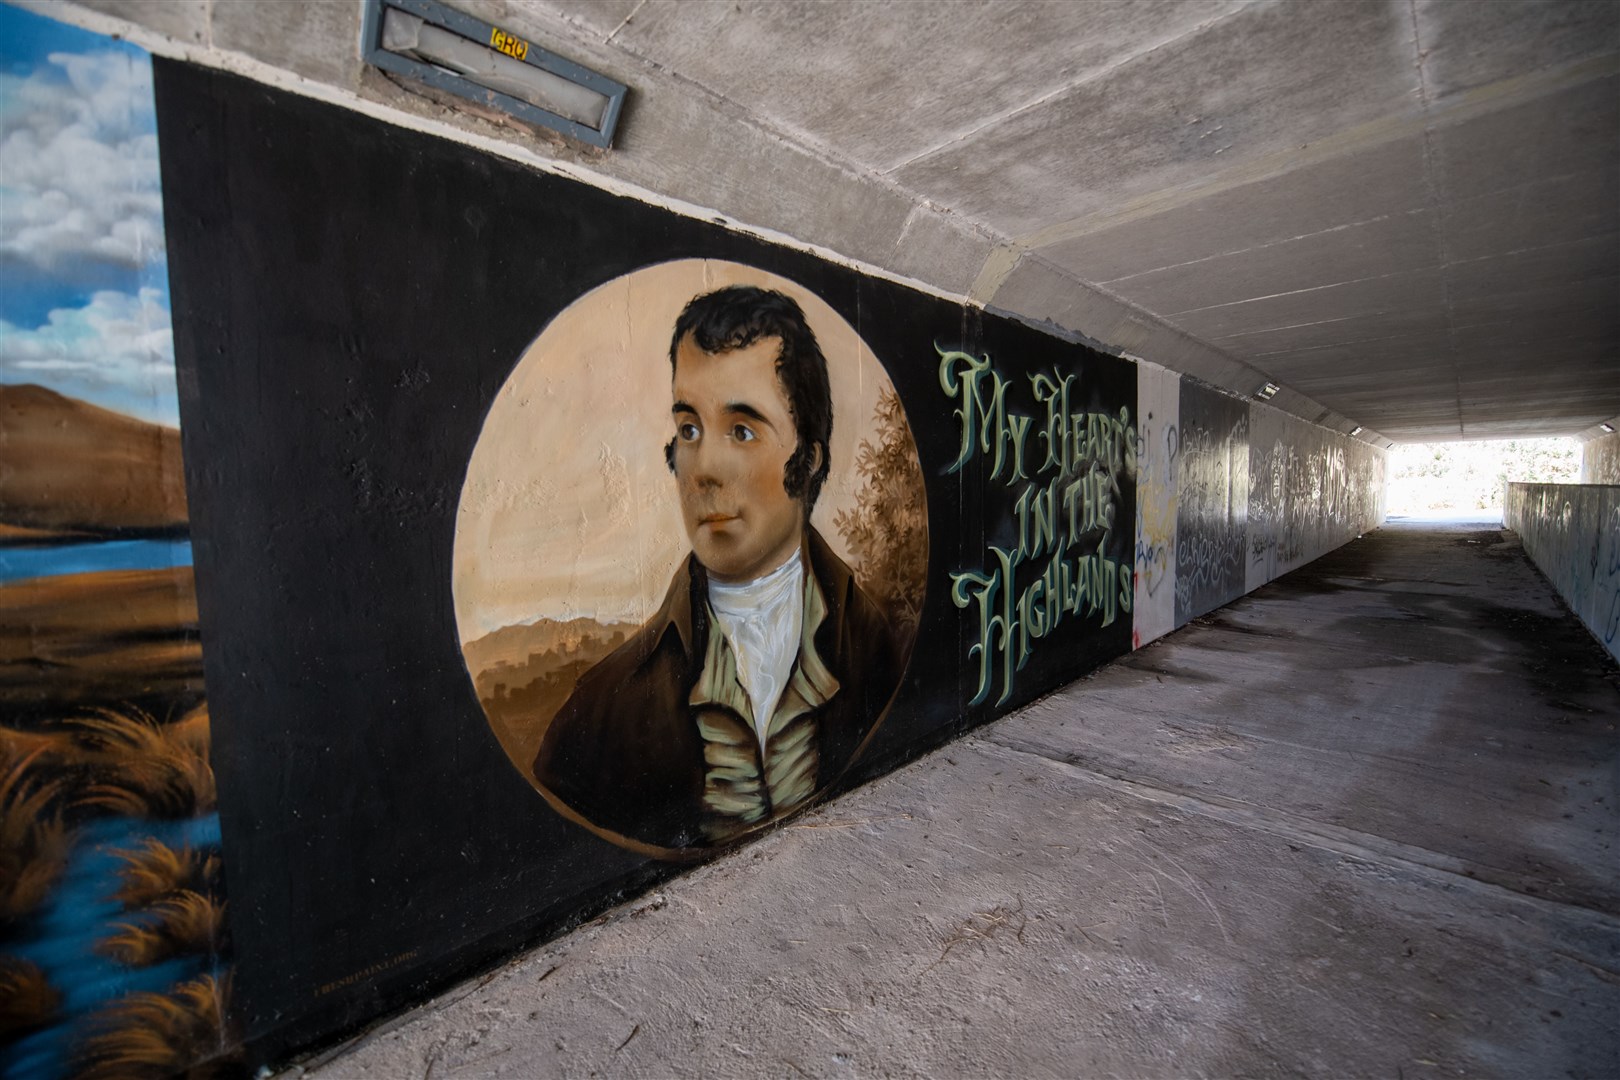 The bard Rabbie Burns already has residence in the underpass.